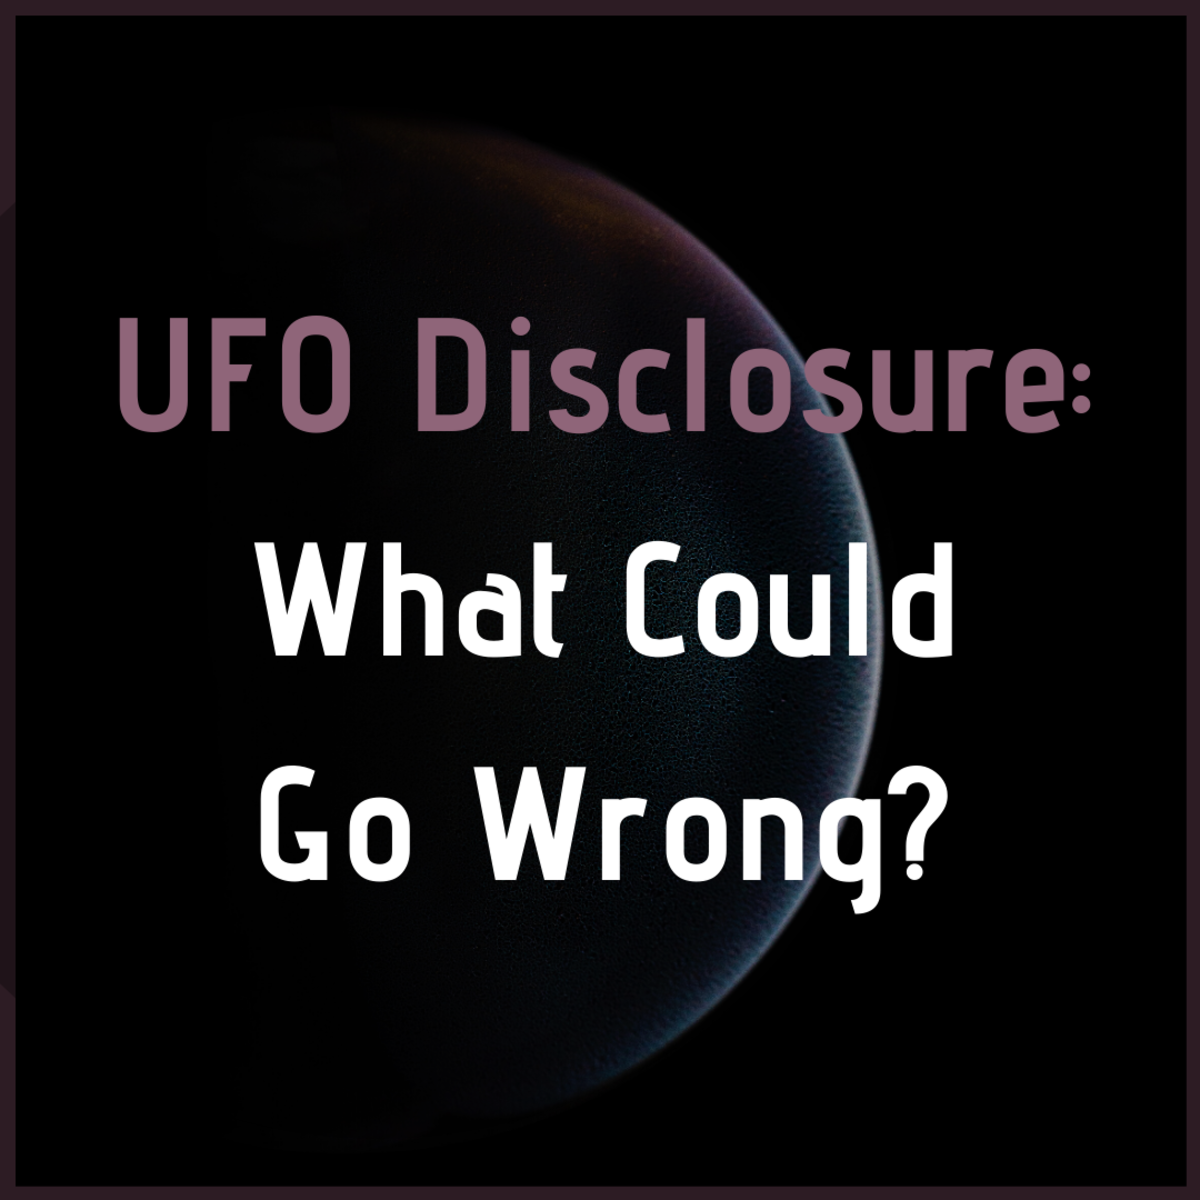 5 Possible Downsides to the UFO Disclosure